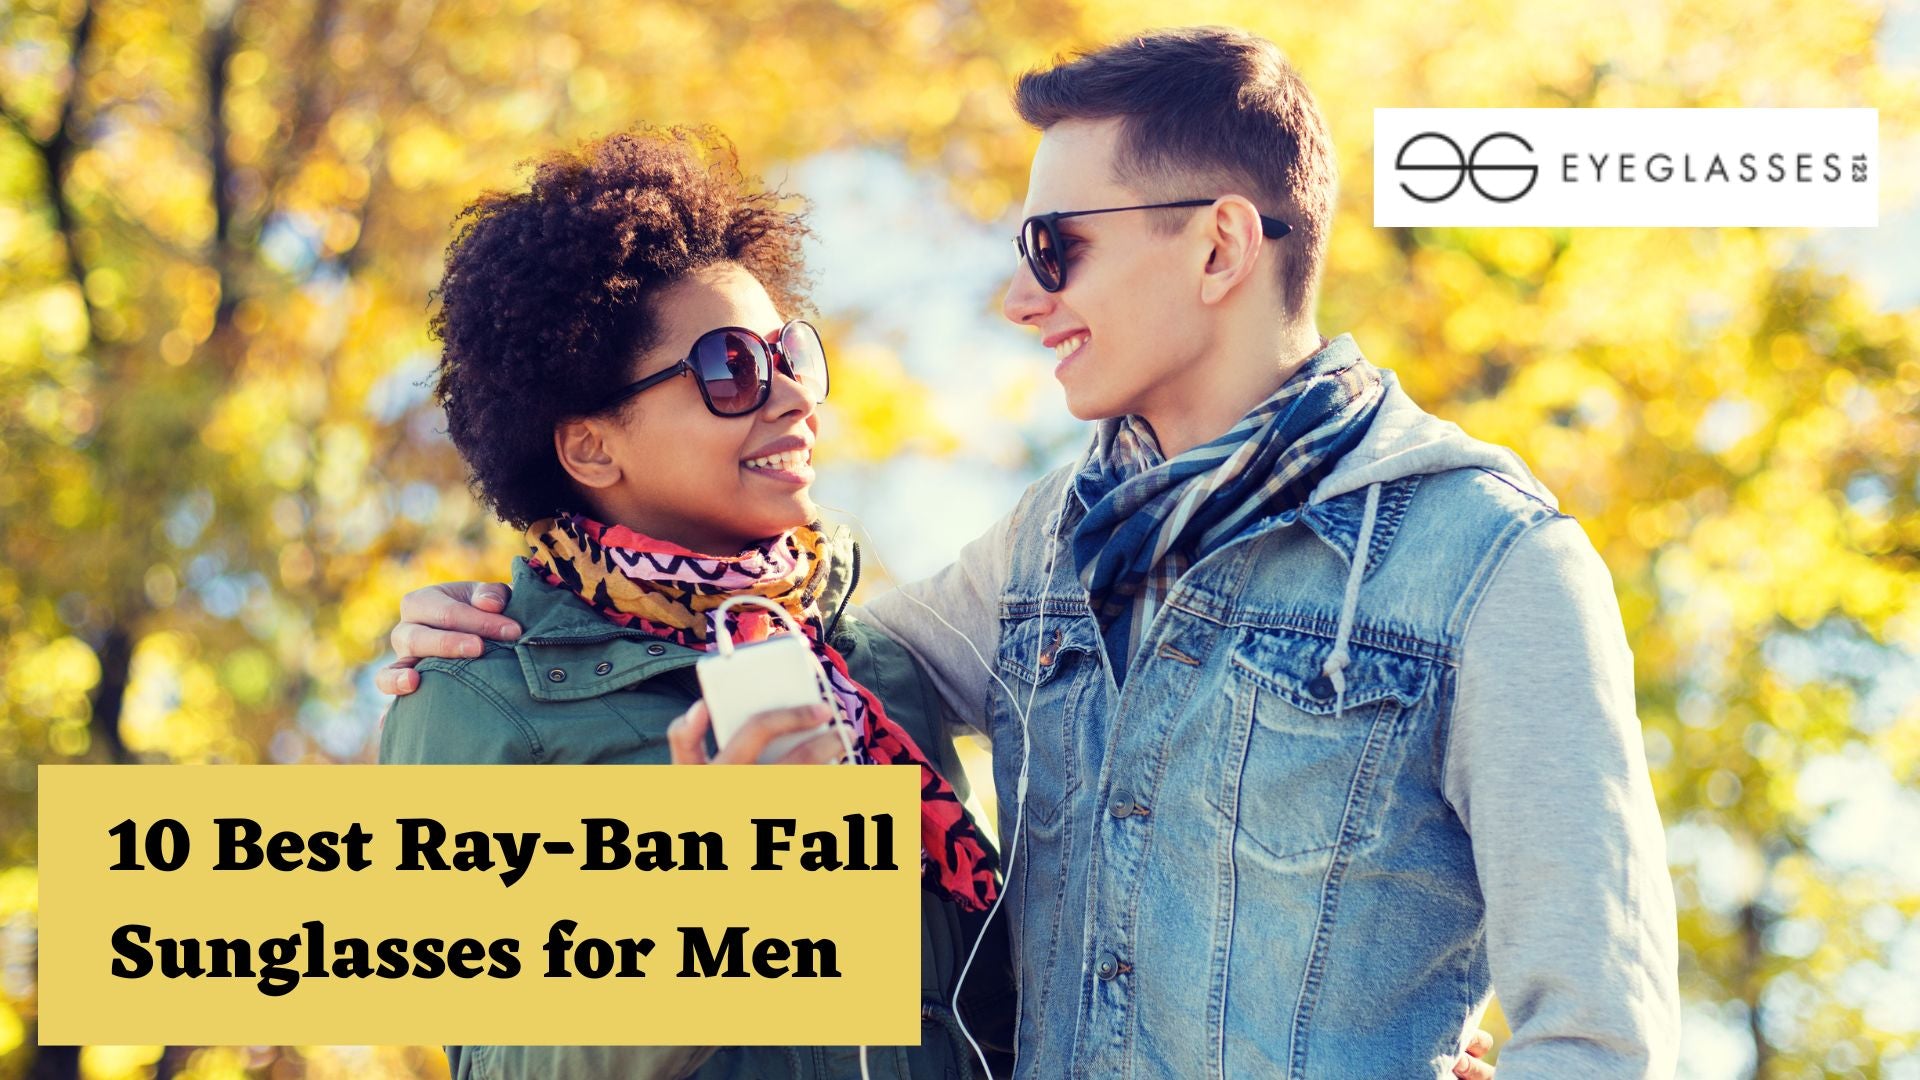 10 Best Ray-Ban Fall Sunglasses for Men